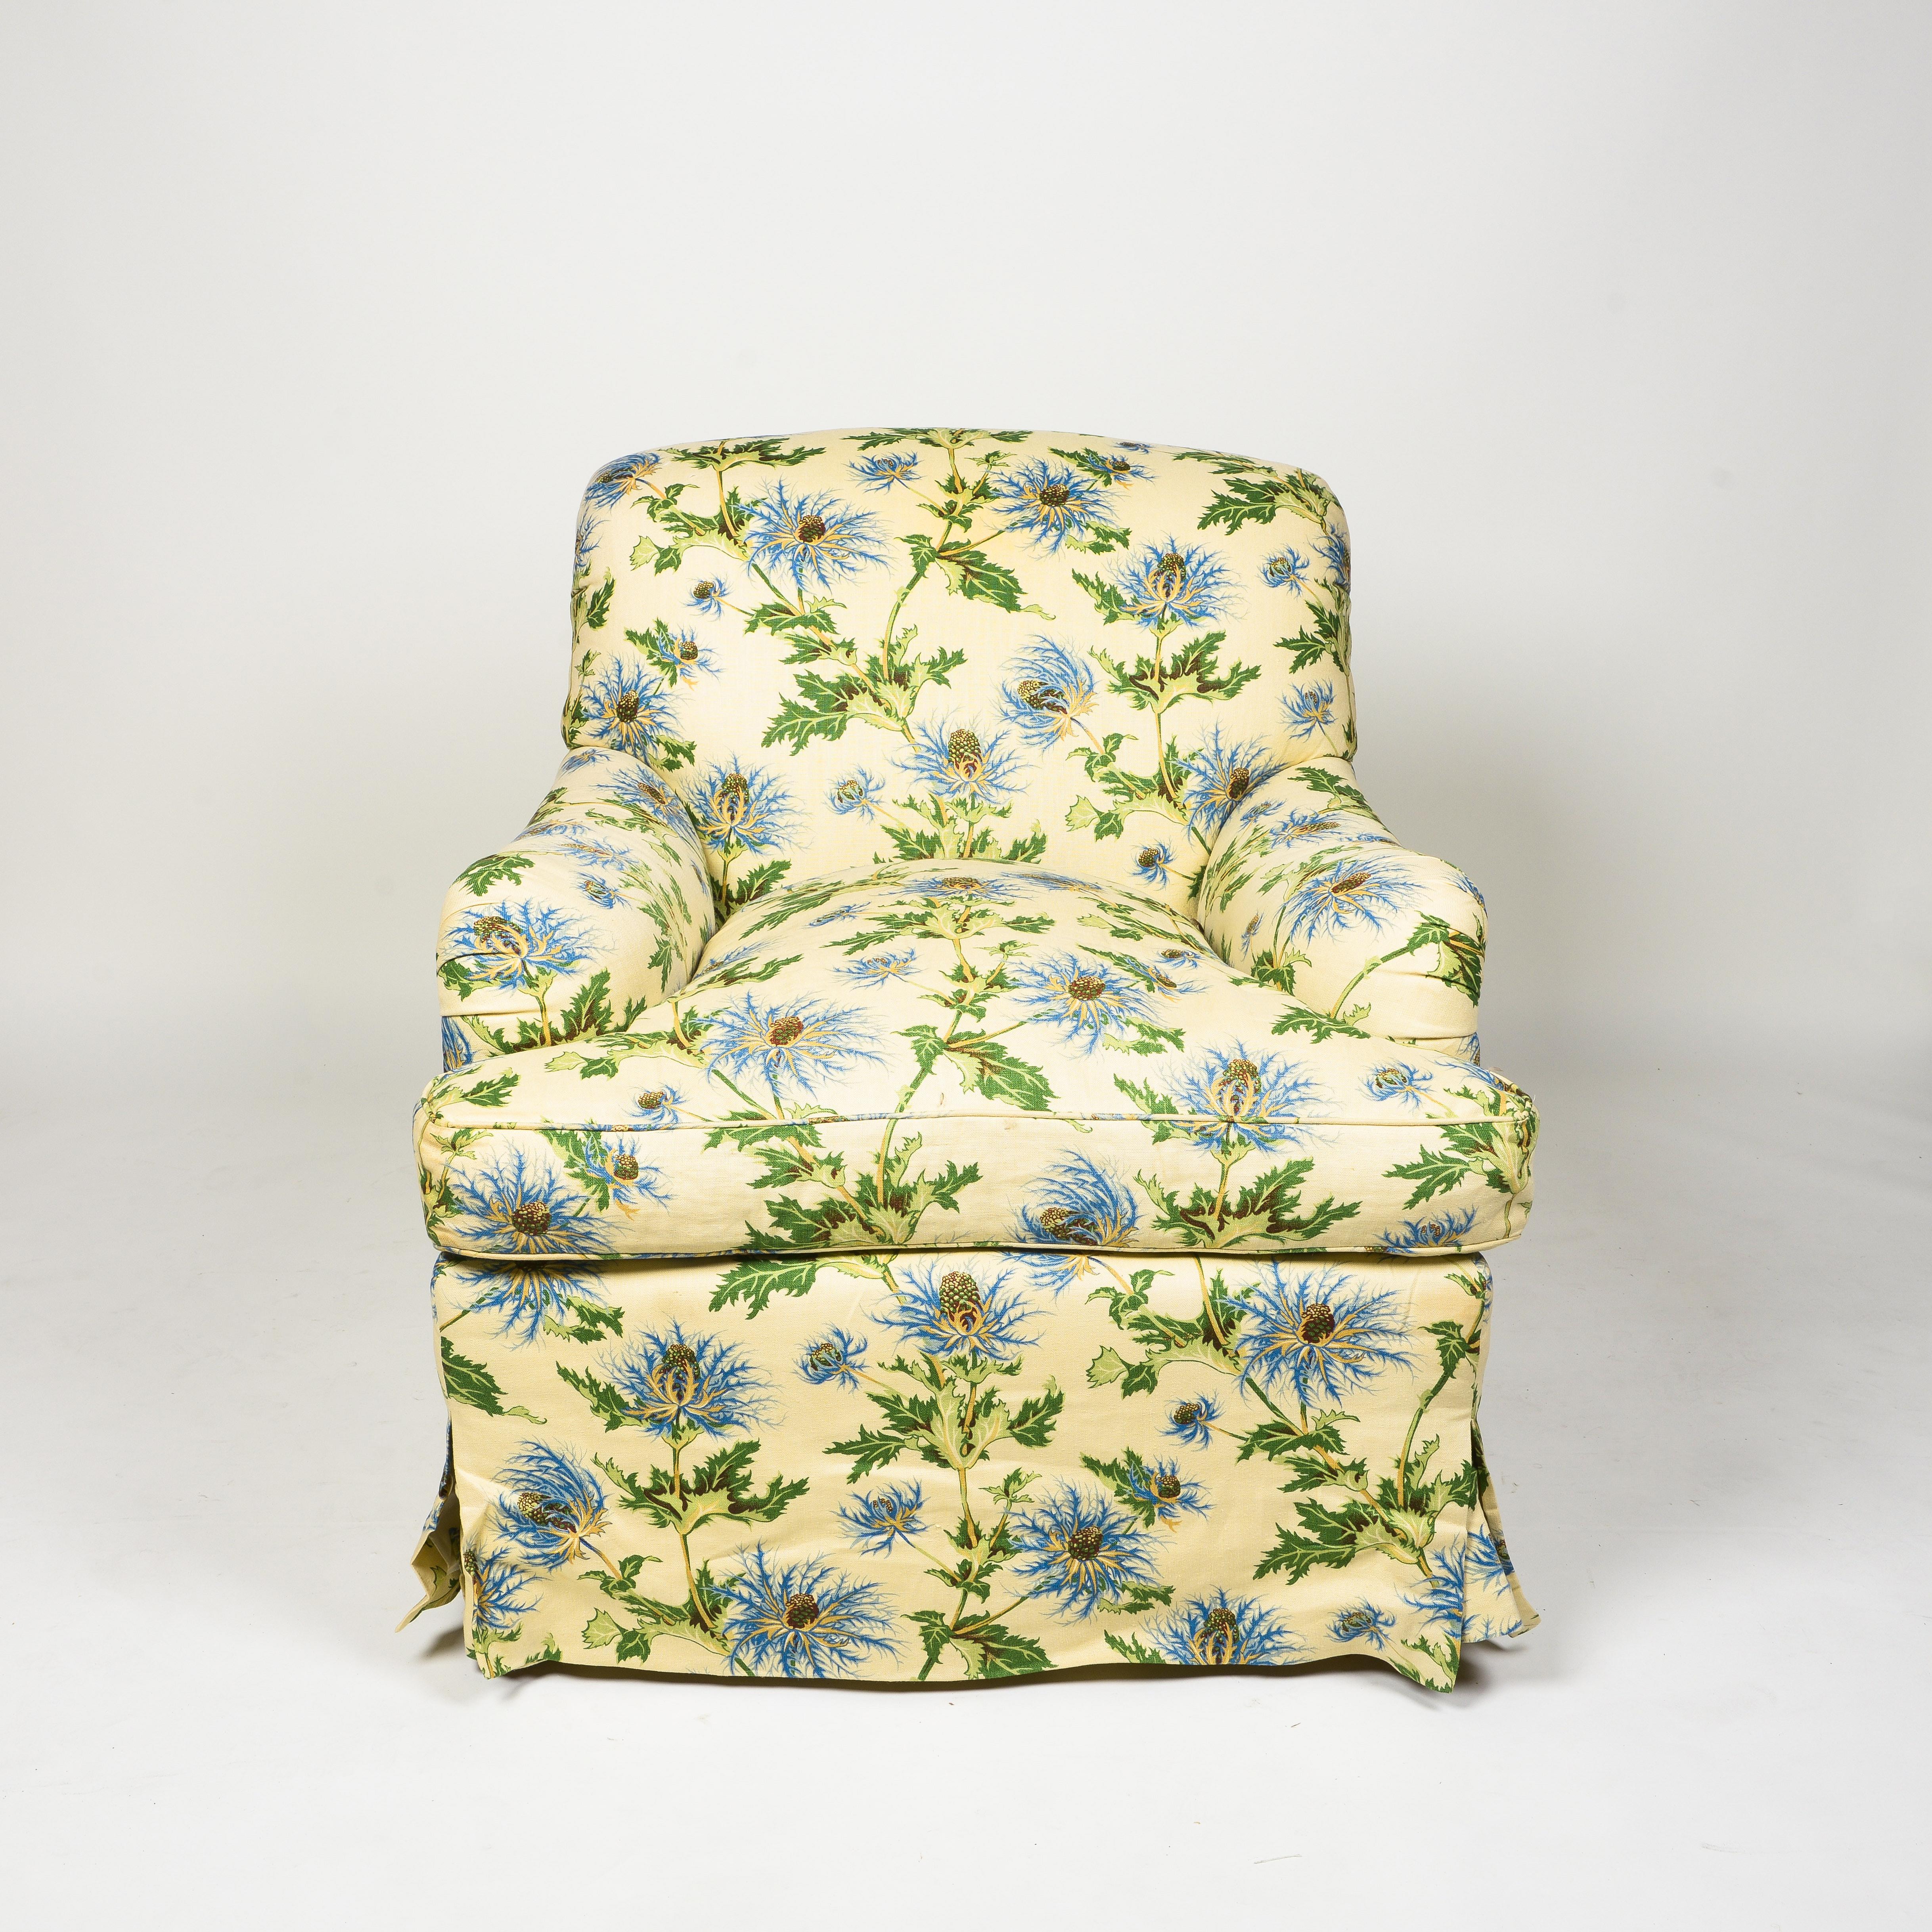 Of generous proportions and extremely comfortable; custom-made with down seat cushion; upholstered with loose seat cushion in a cream linen thistle print.